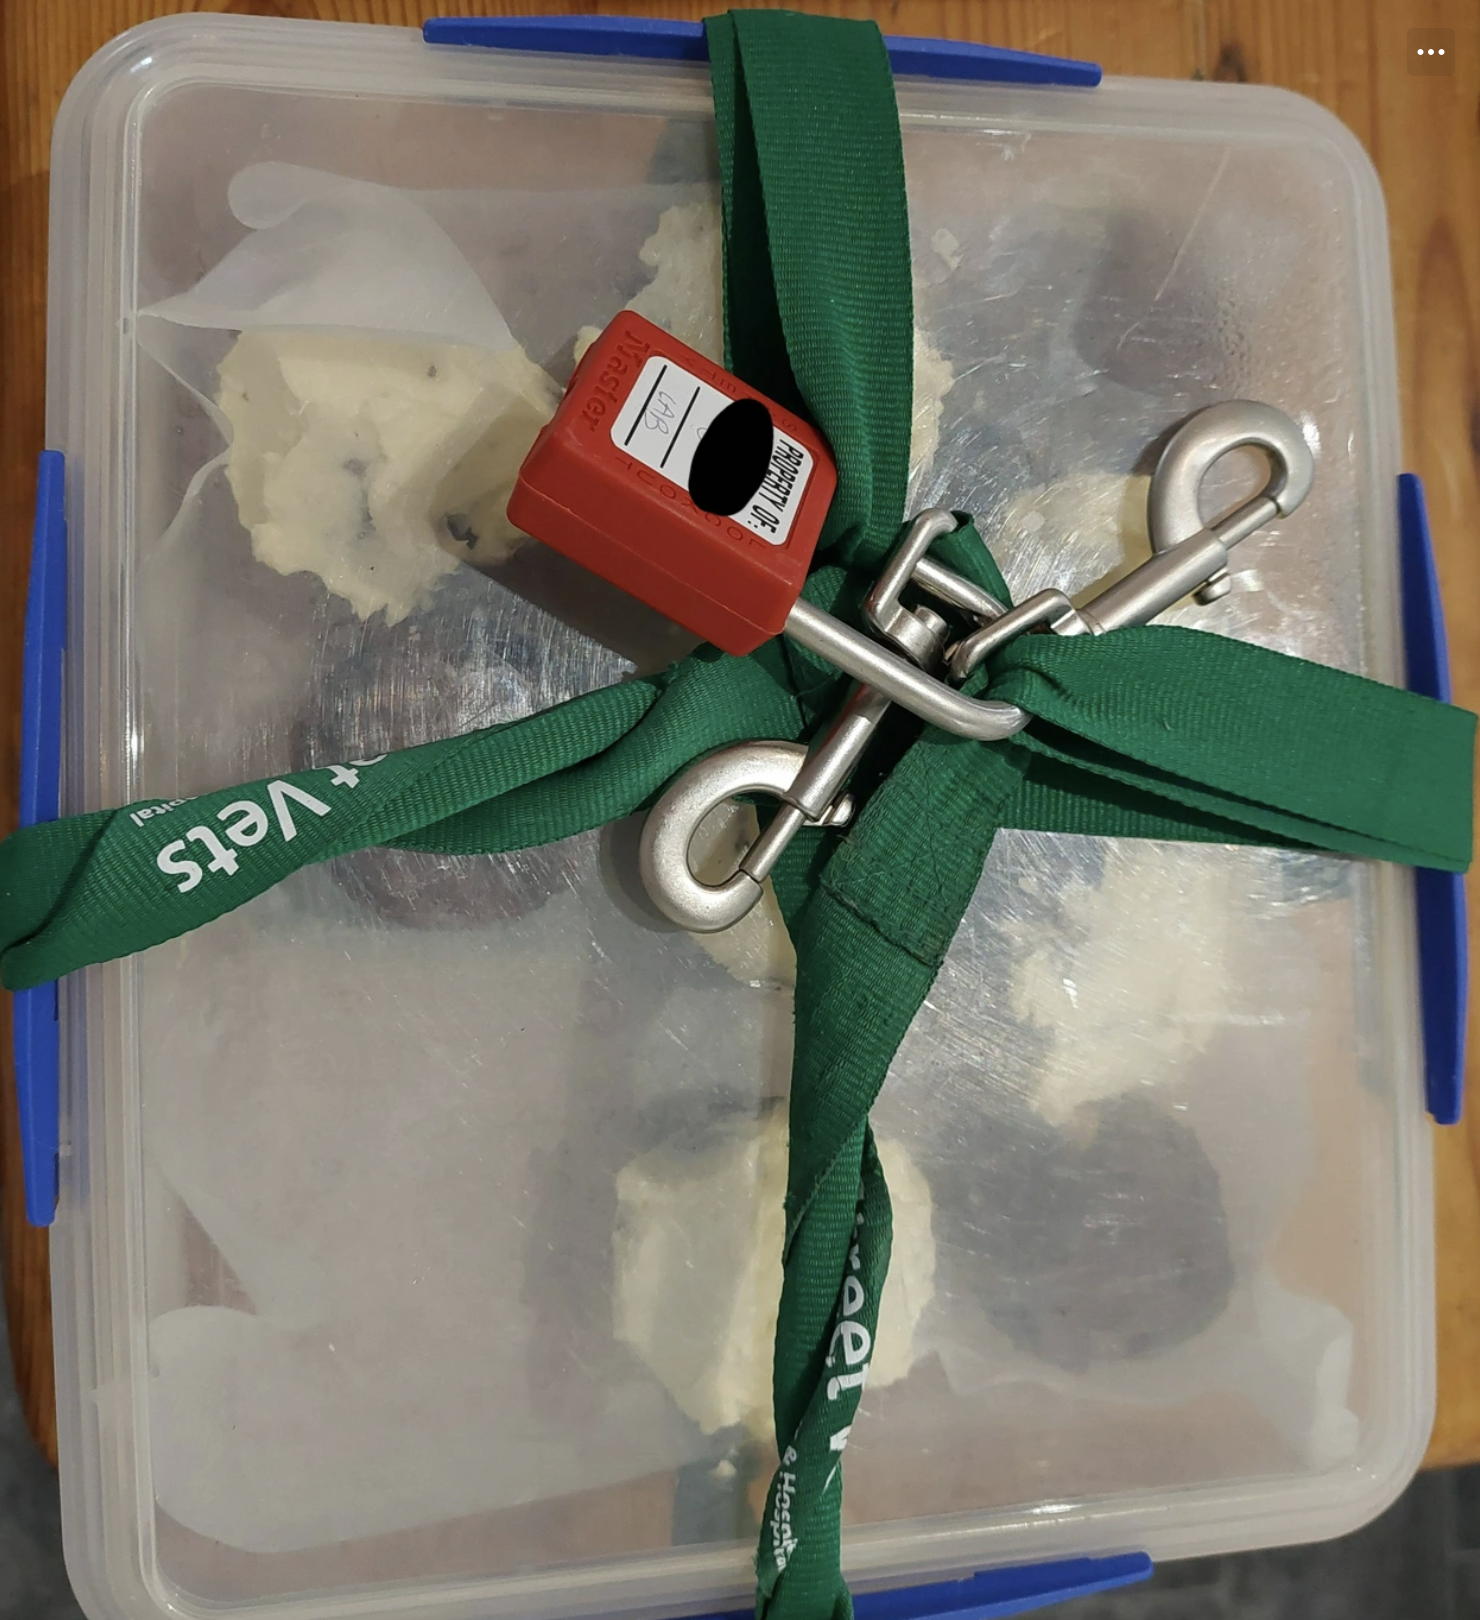 Plastic container secured with a green strap and padlock, hinting at humorous food protection measures